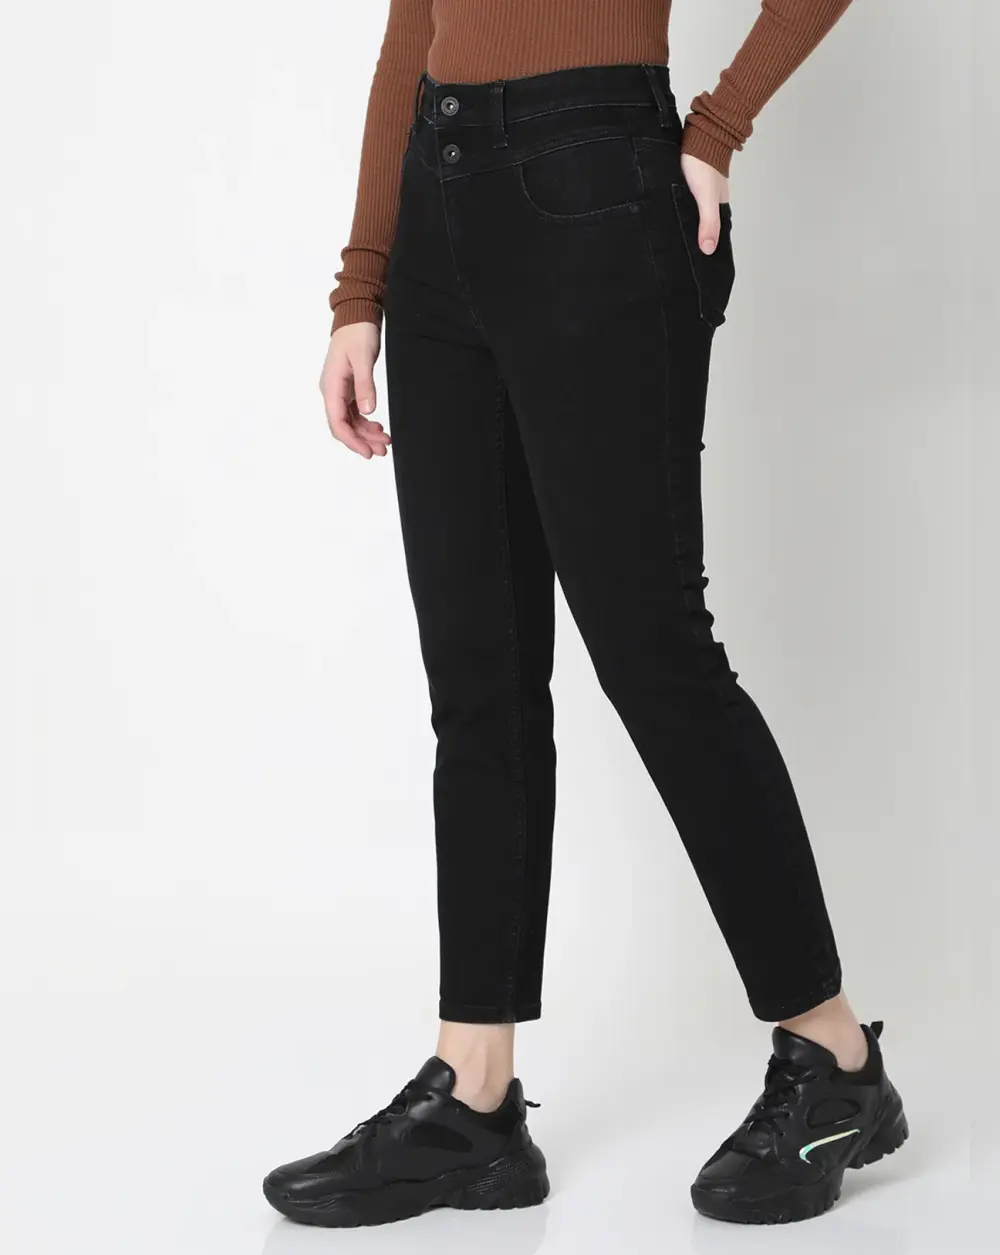 BLACK HIGH RISE SKINNY FIT JEANS